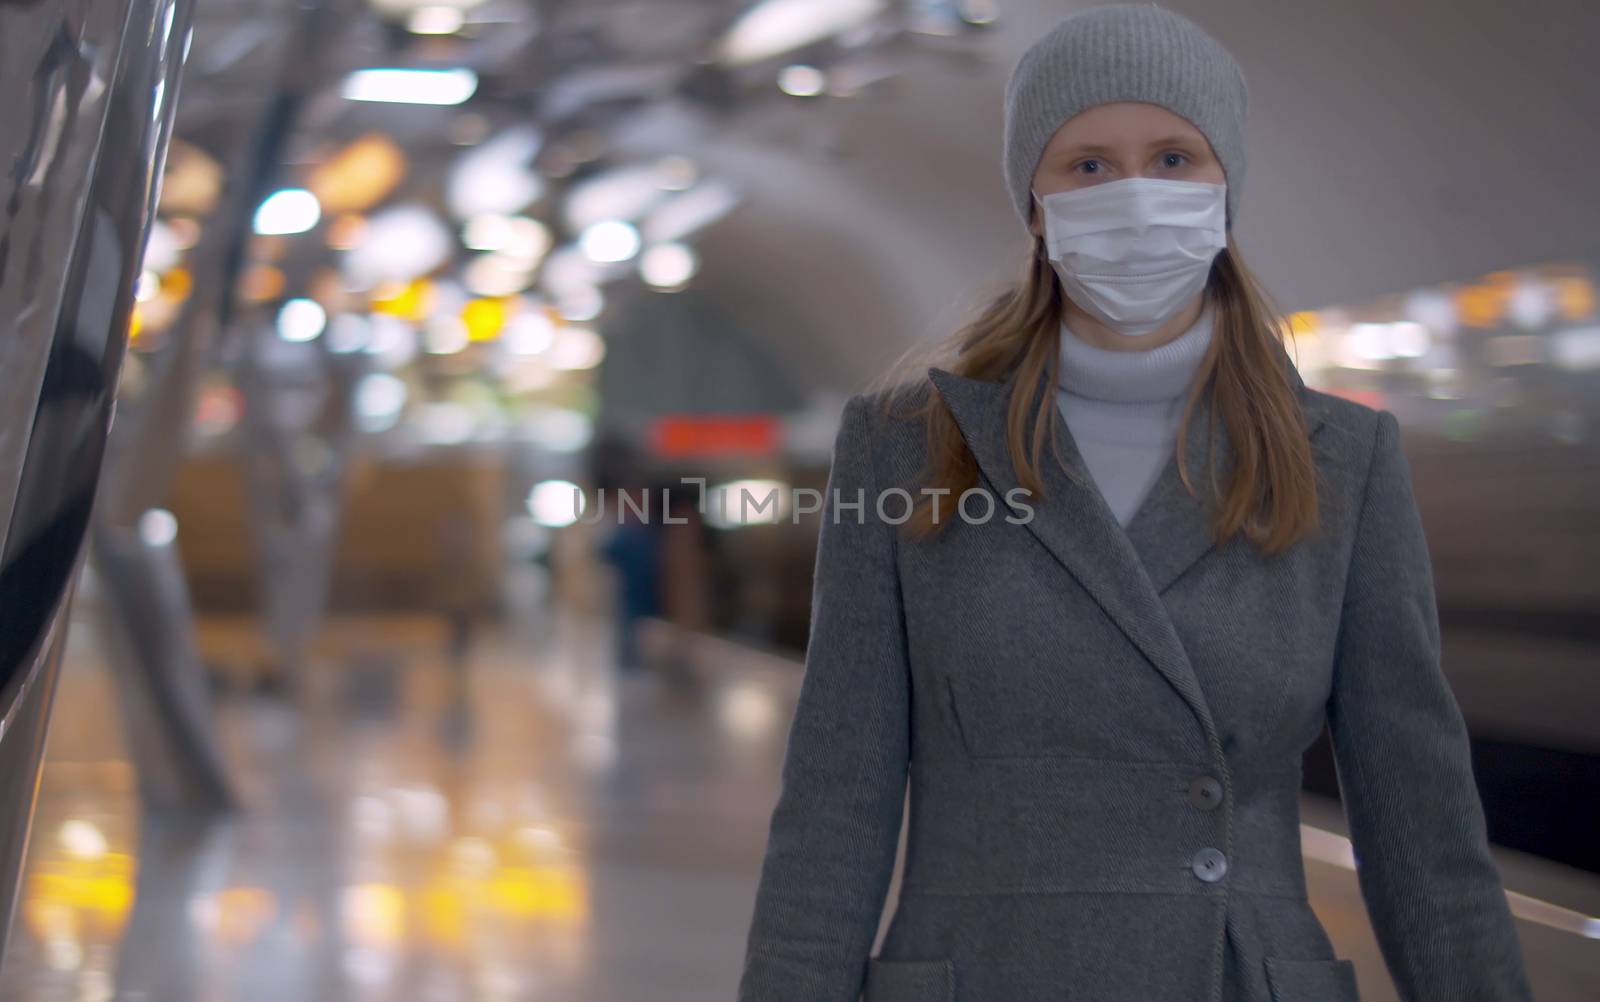 Portrait of young woman in protective mask standing on the subway station. Beautiful blurry background. Healthy and safety lifestyle concept. Covid-19 pandemic